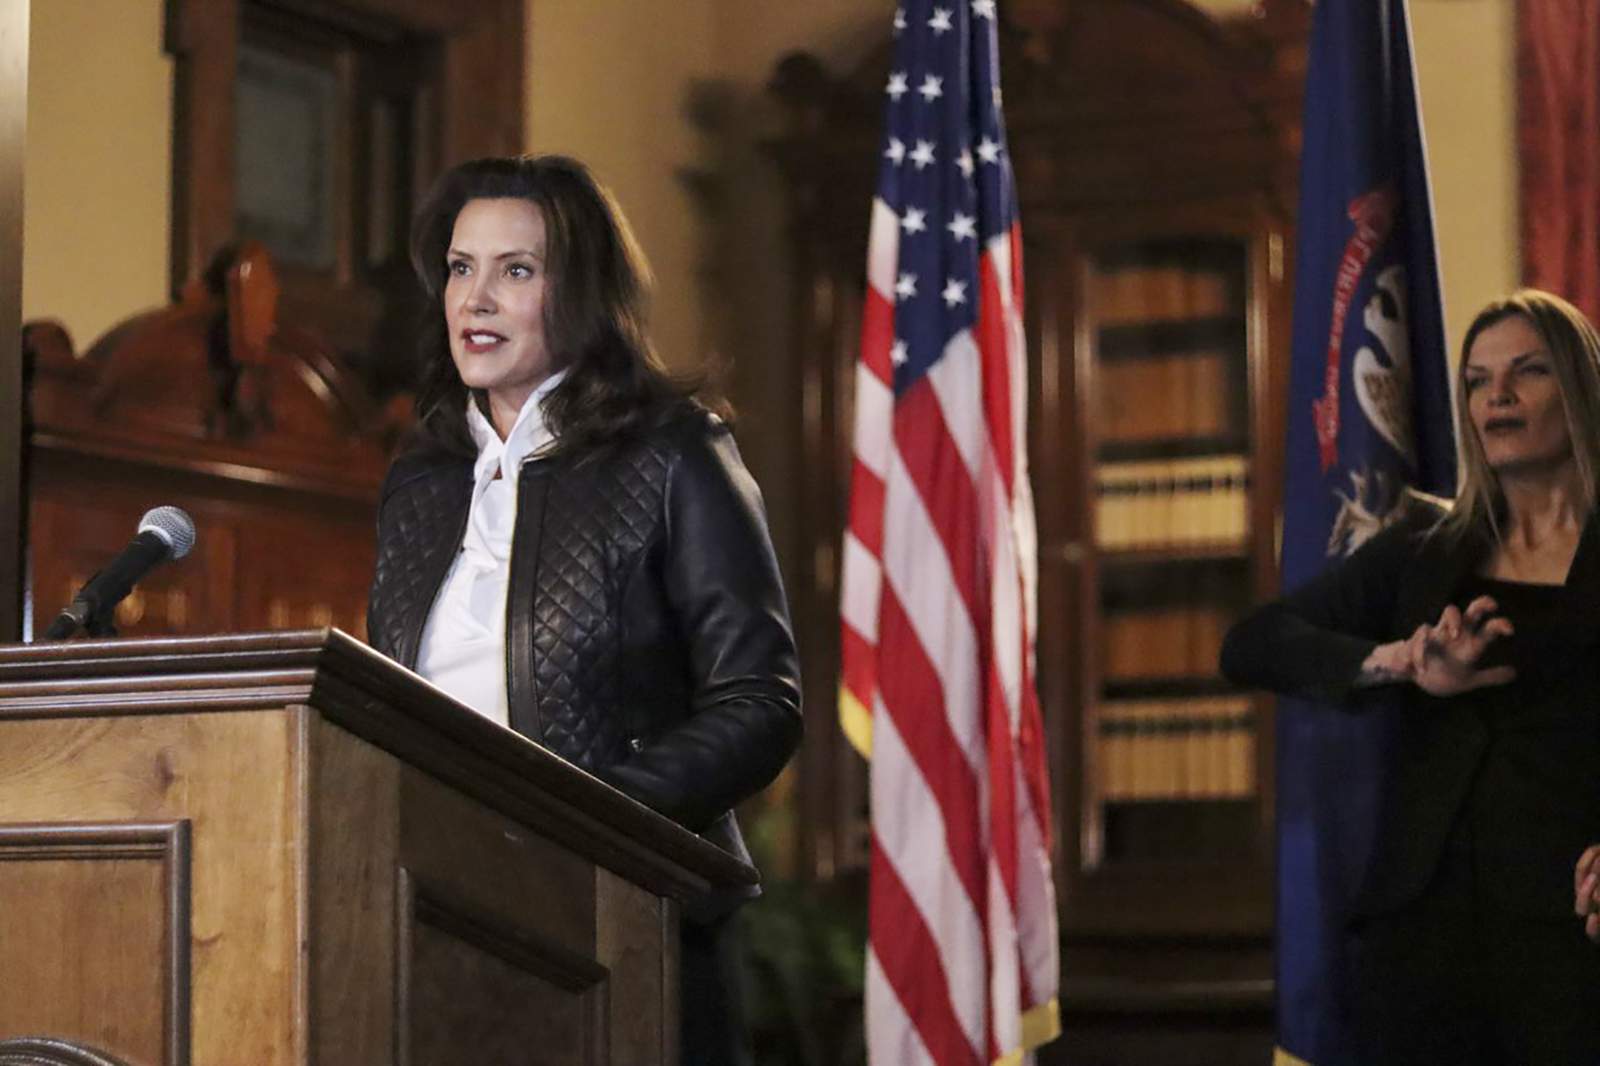 Michigan Gov. Whitmer on kidnapping plot: ‘They’re not militias. They’re domestic terrorists’